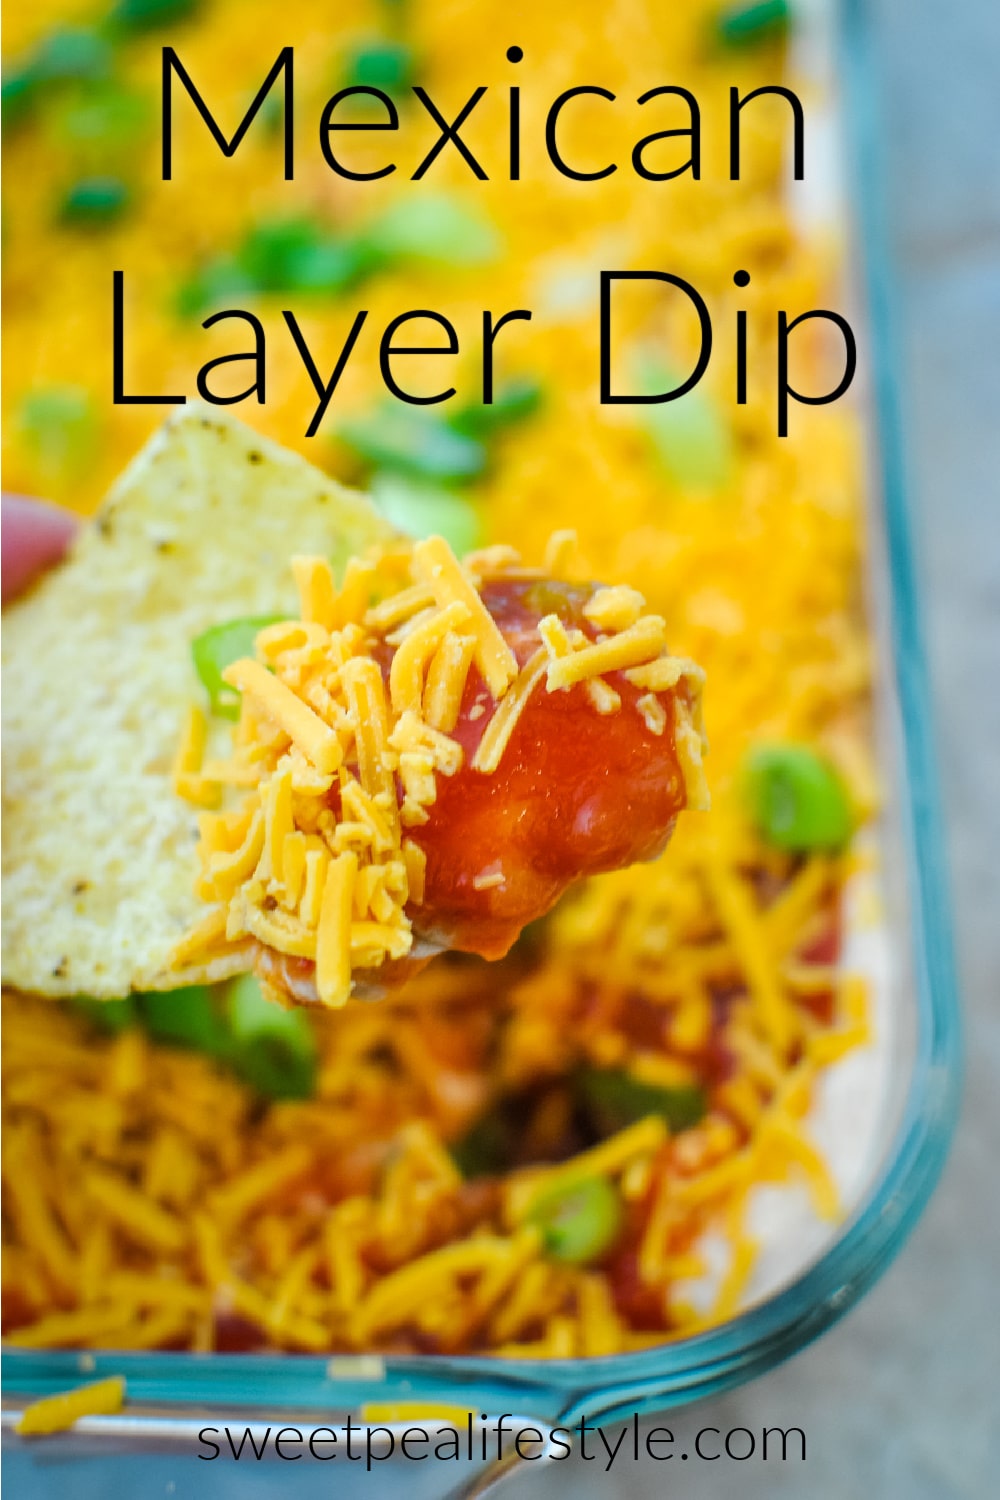 Mexican Layer Dip Recipe Idea from Sweetpea Lifestyle